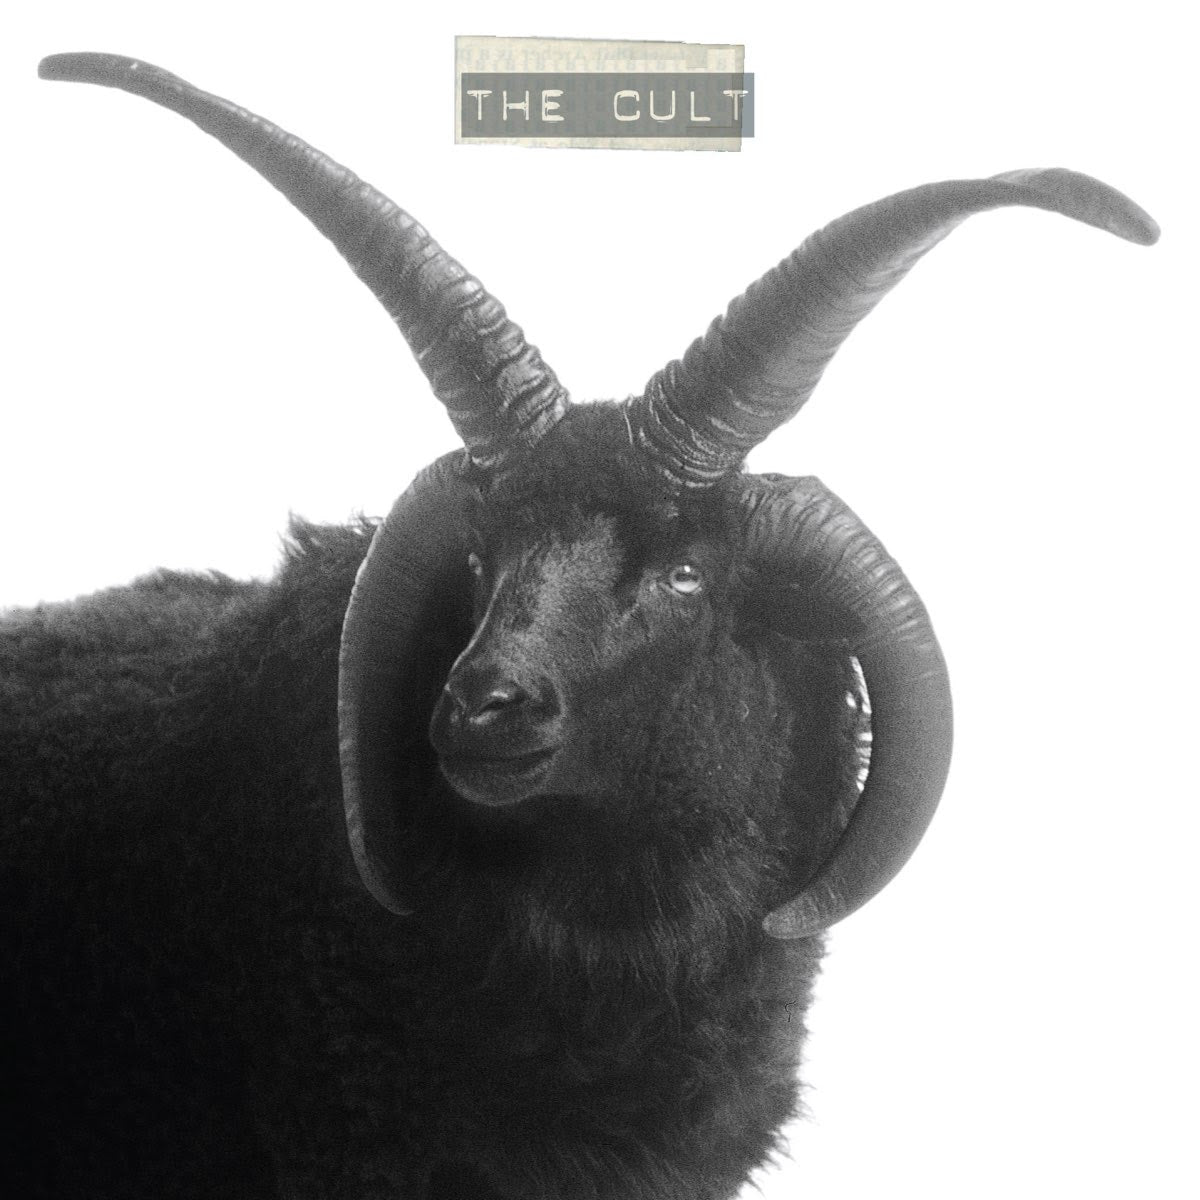 The Cult – The Cult | Buy the Vinyl LP from Flying Nun Records